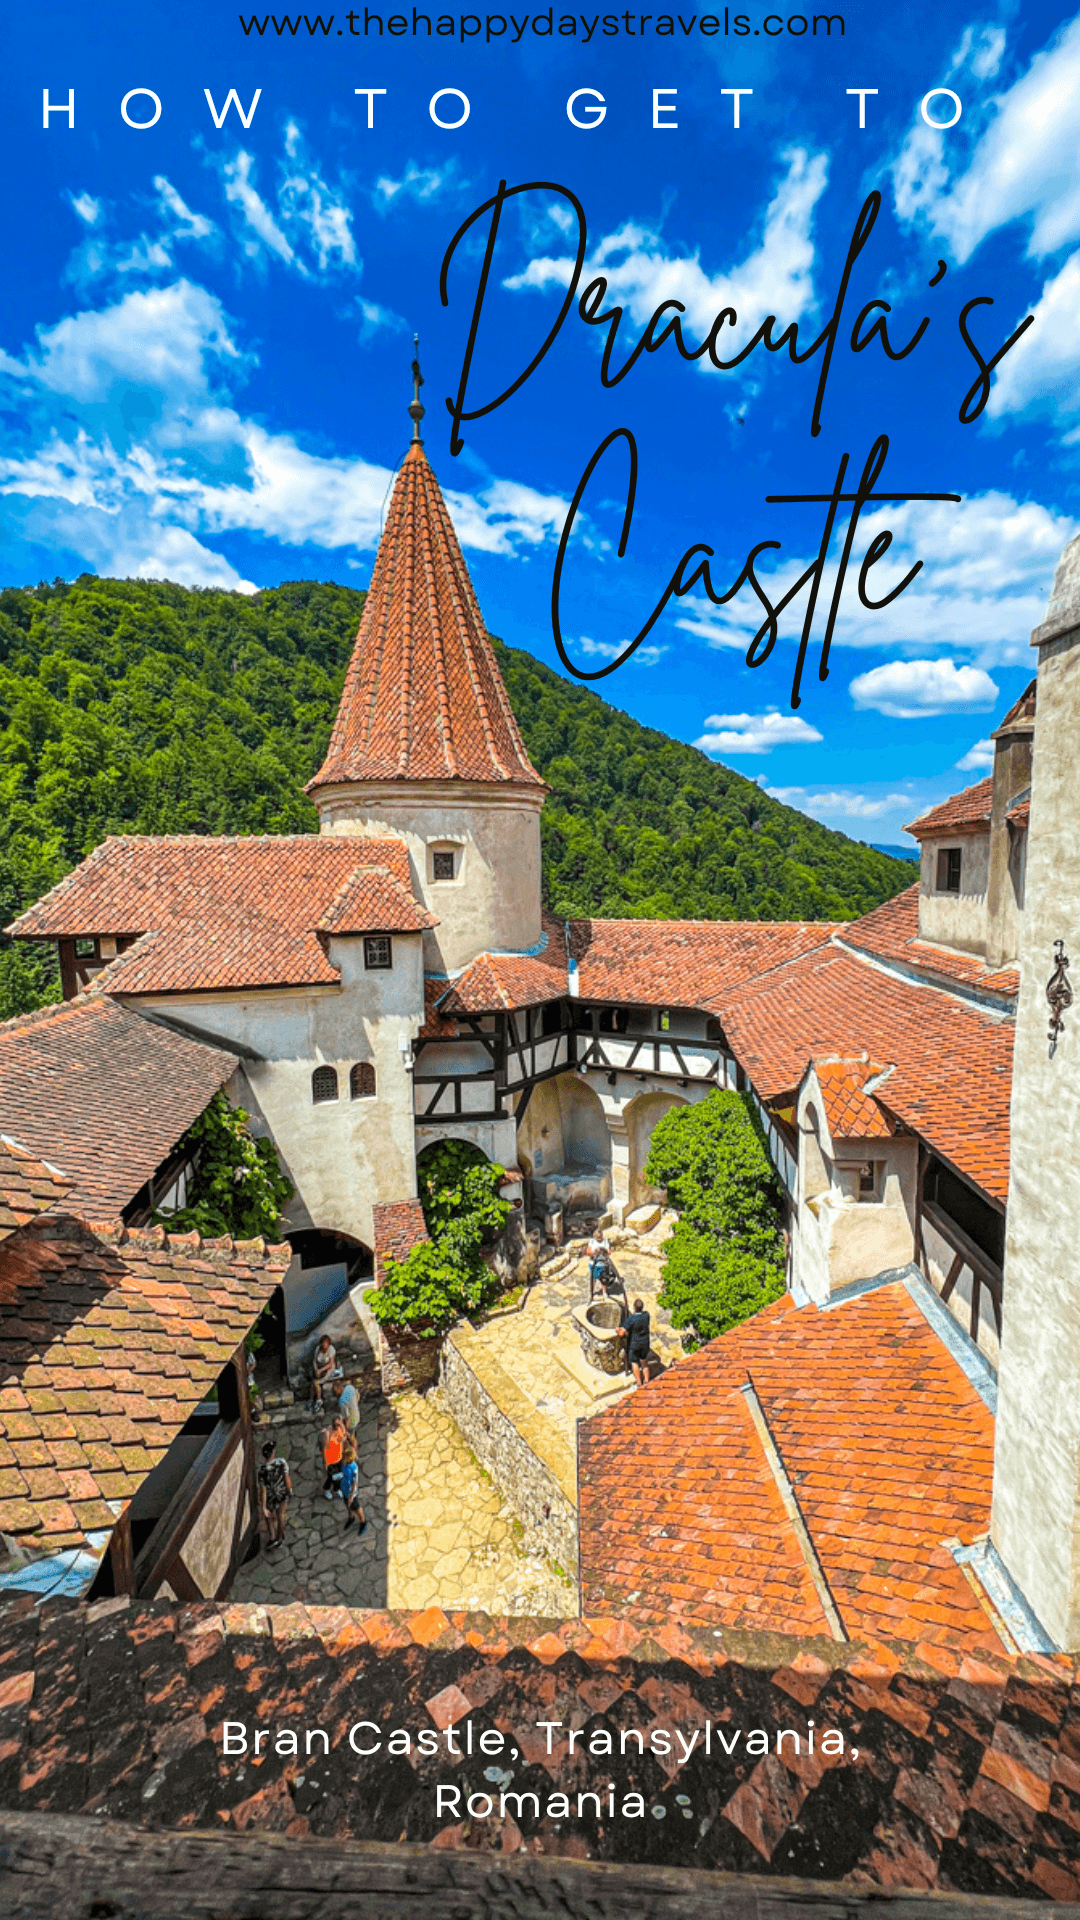 Pin image text is 'how to get to dracula's castle' with image of Bran Castle courtyard with Carpathian Mountains and blue sky in background